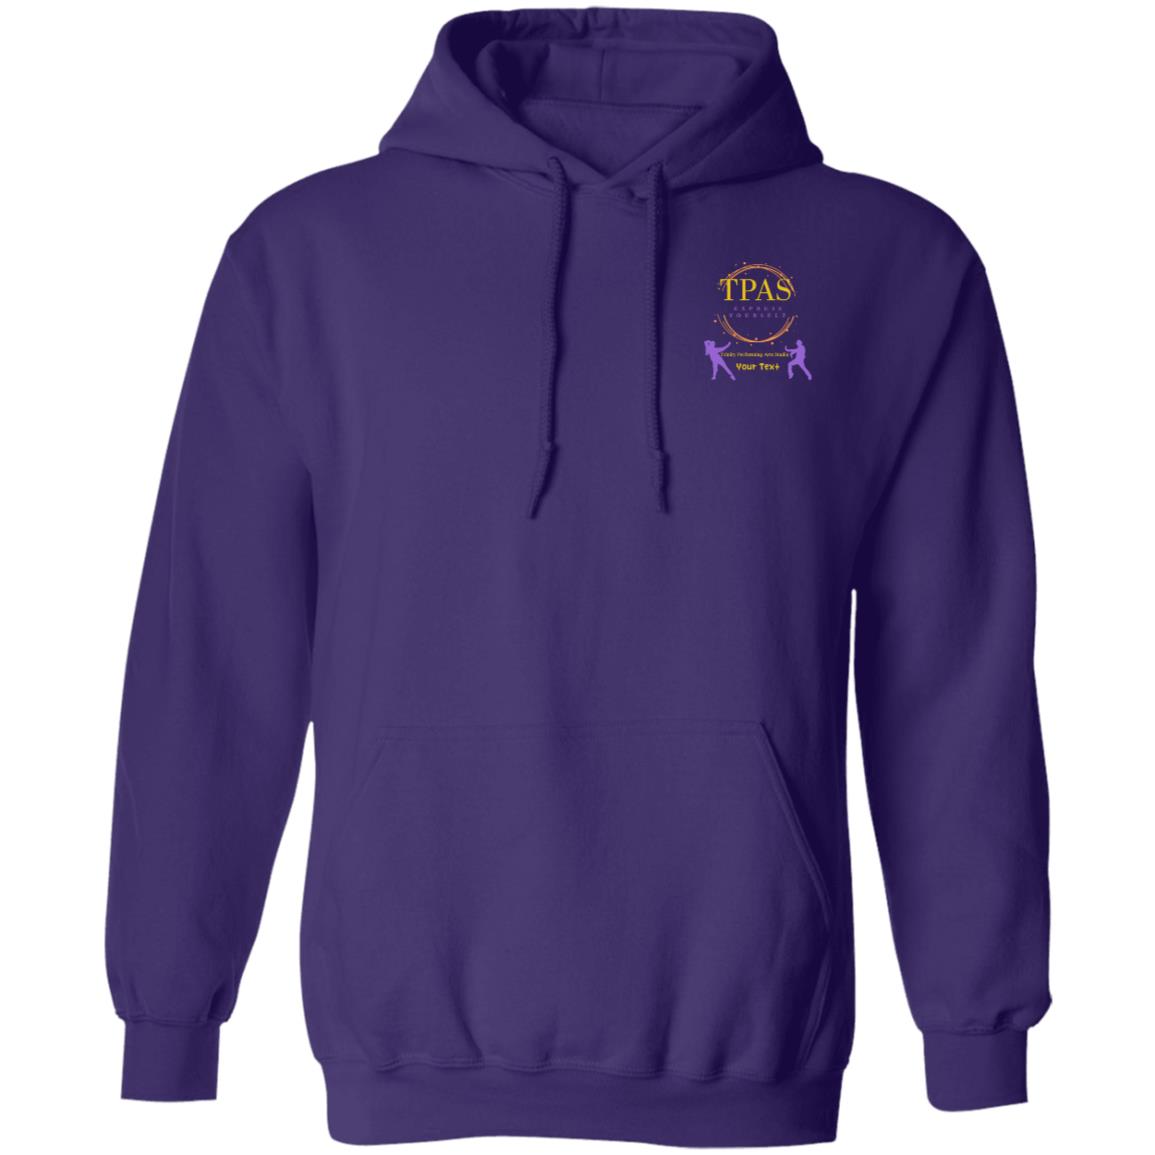 TPAS Competition Team Pullover Hoodie